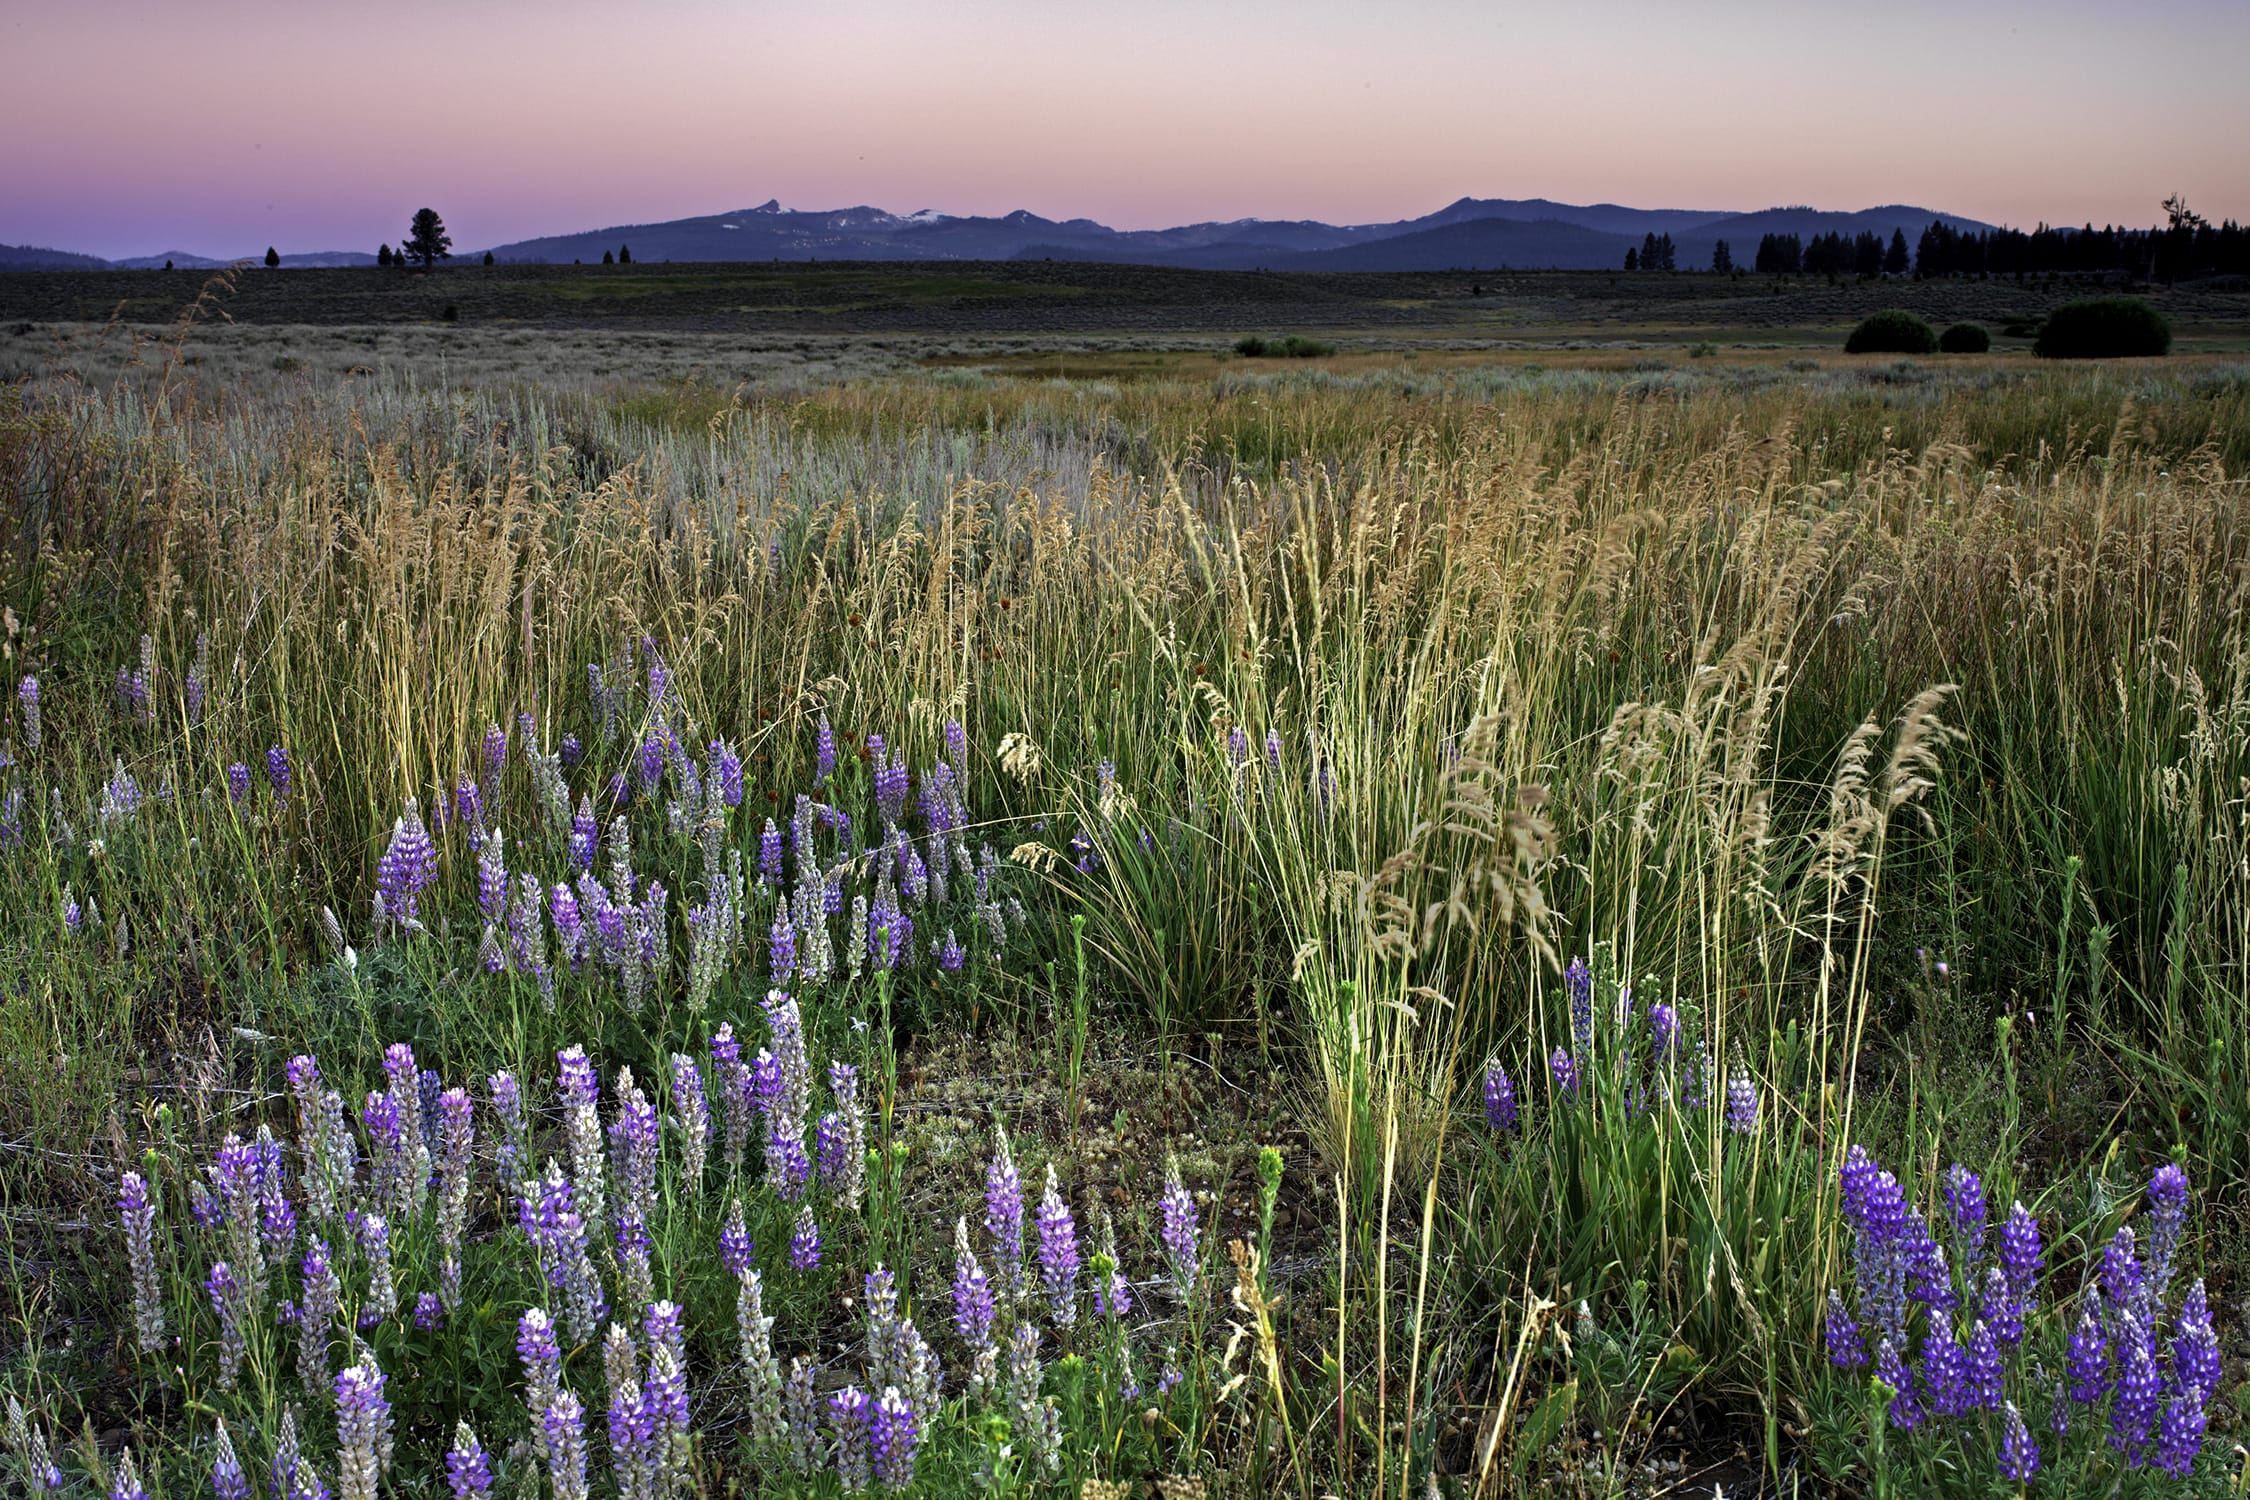 A field of purple flowers with mountains in the background.